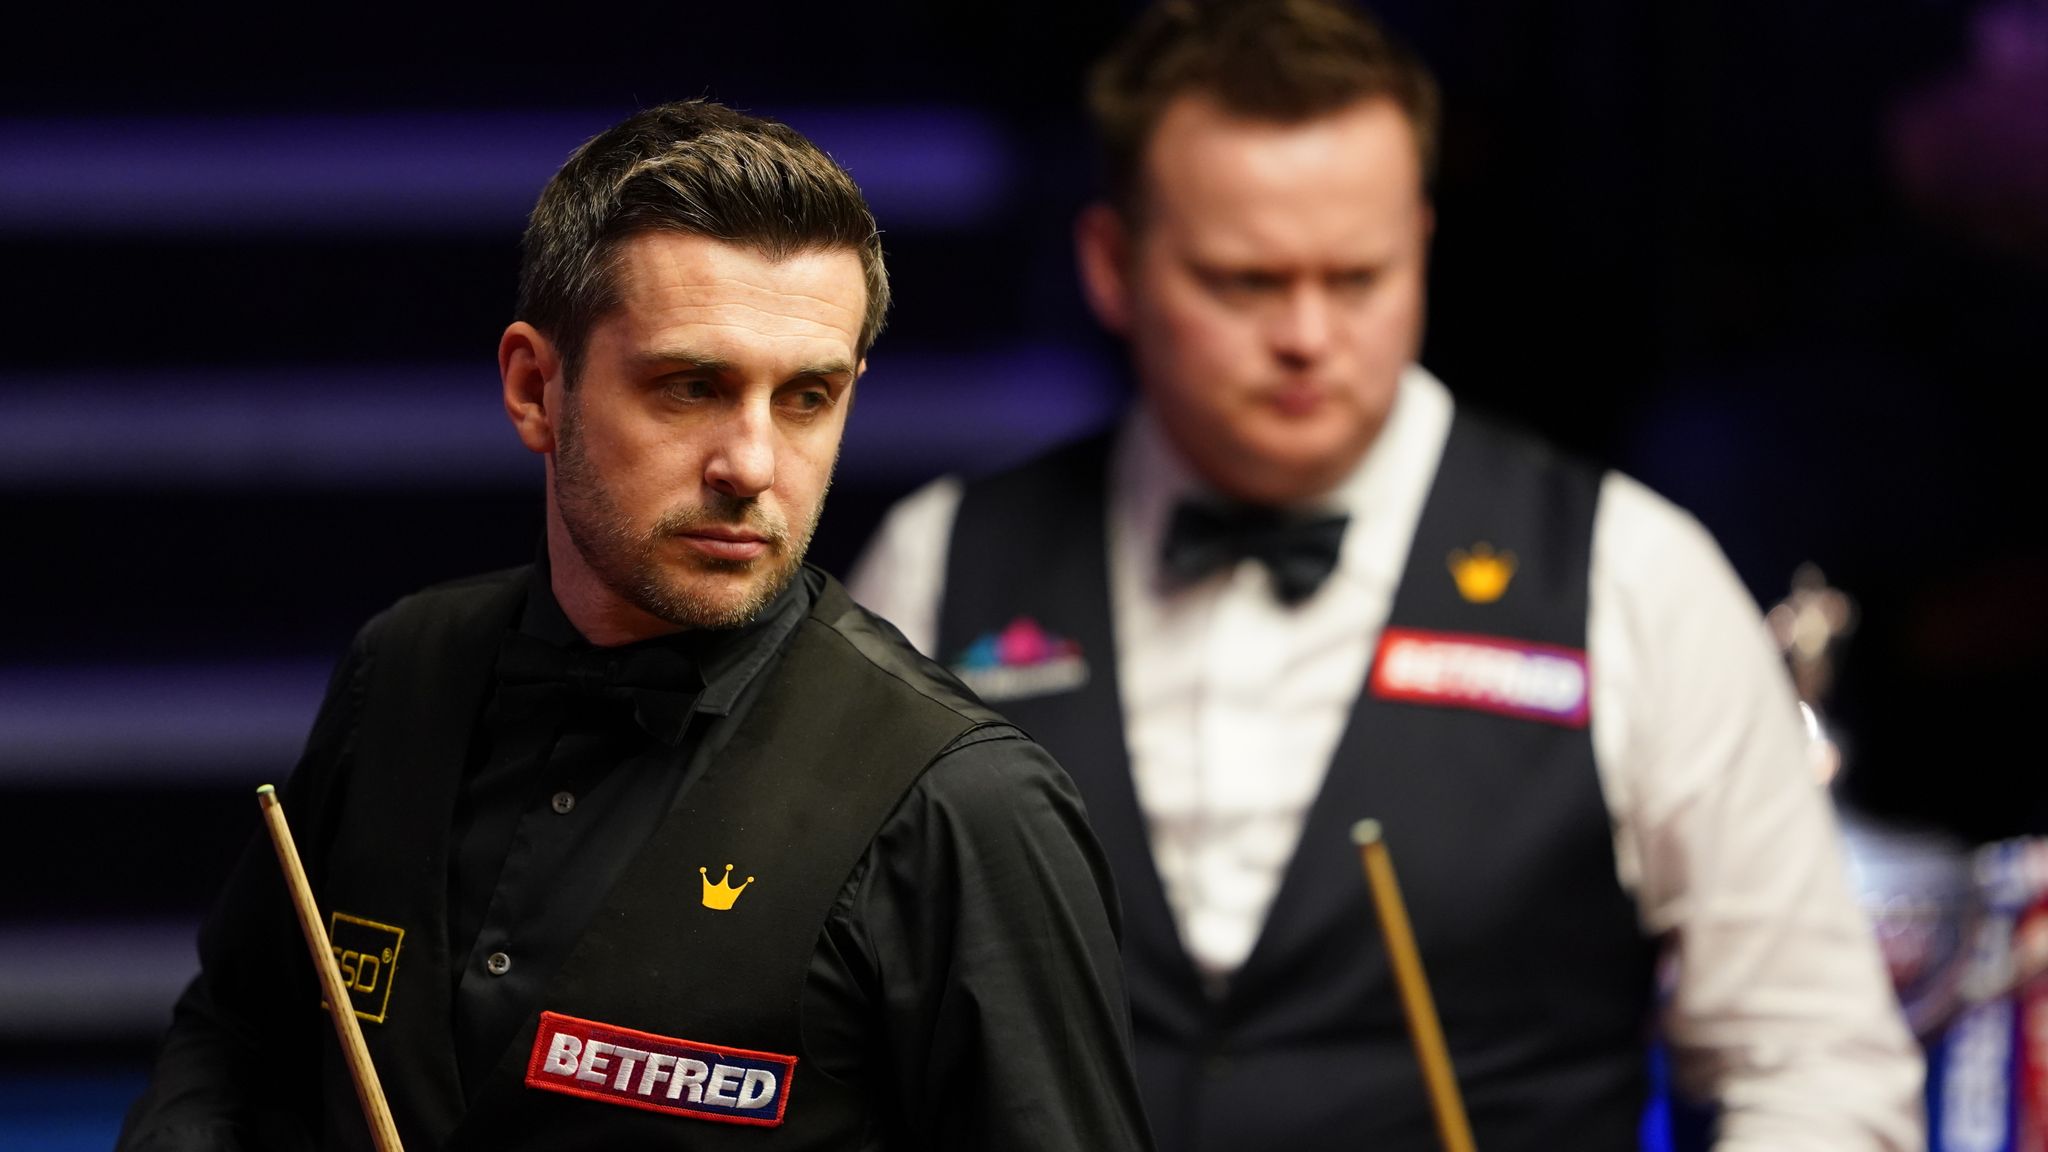 World Snooker Championship Mark Selby four frames away from winning his fourth title at Crucible Snooker News Sky Sports